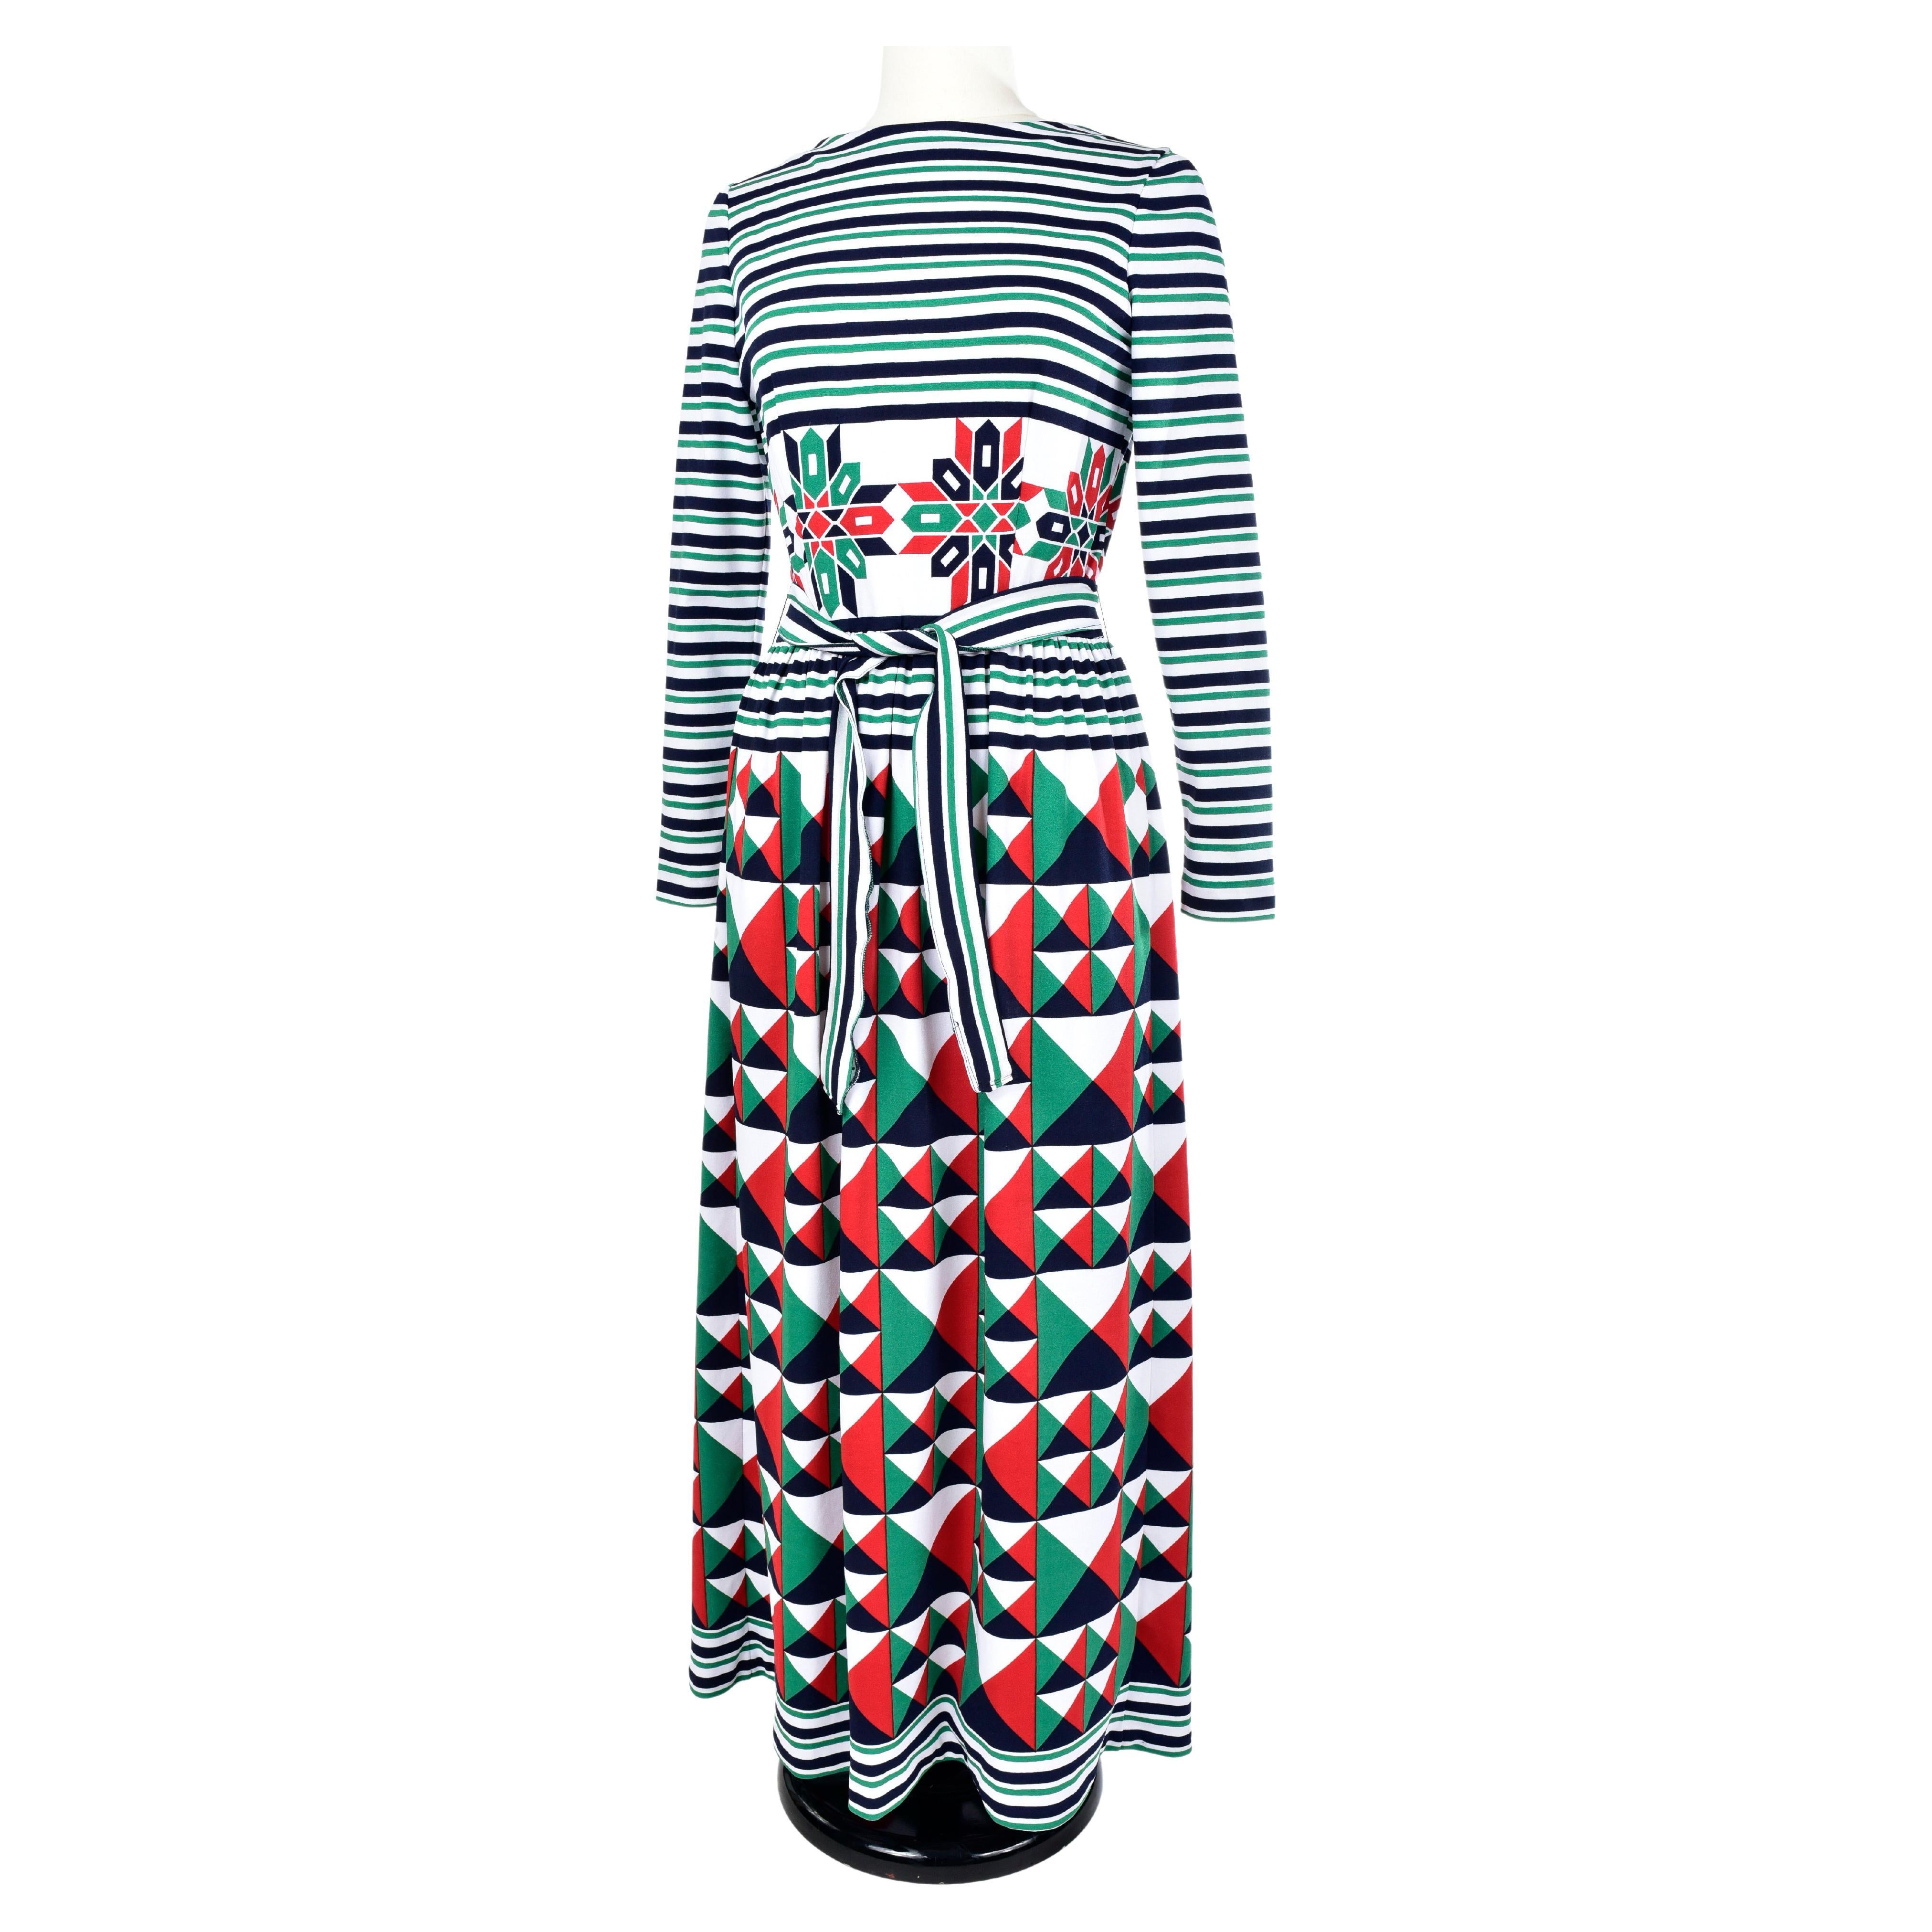 Printed jersey dress by Jules-François Crahay for Lanvin Circa 1972